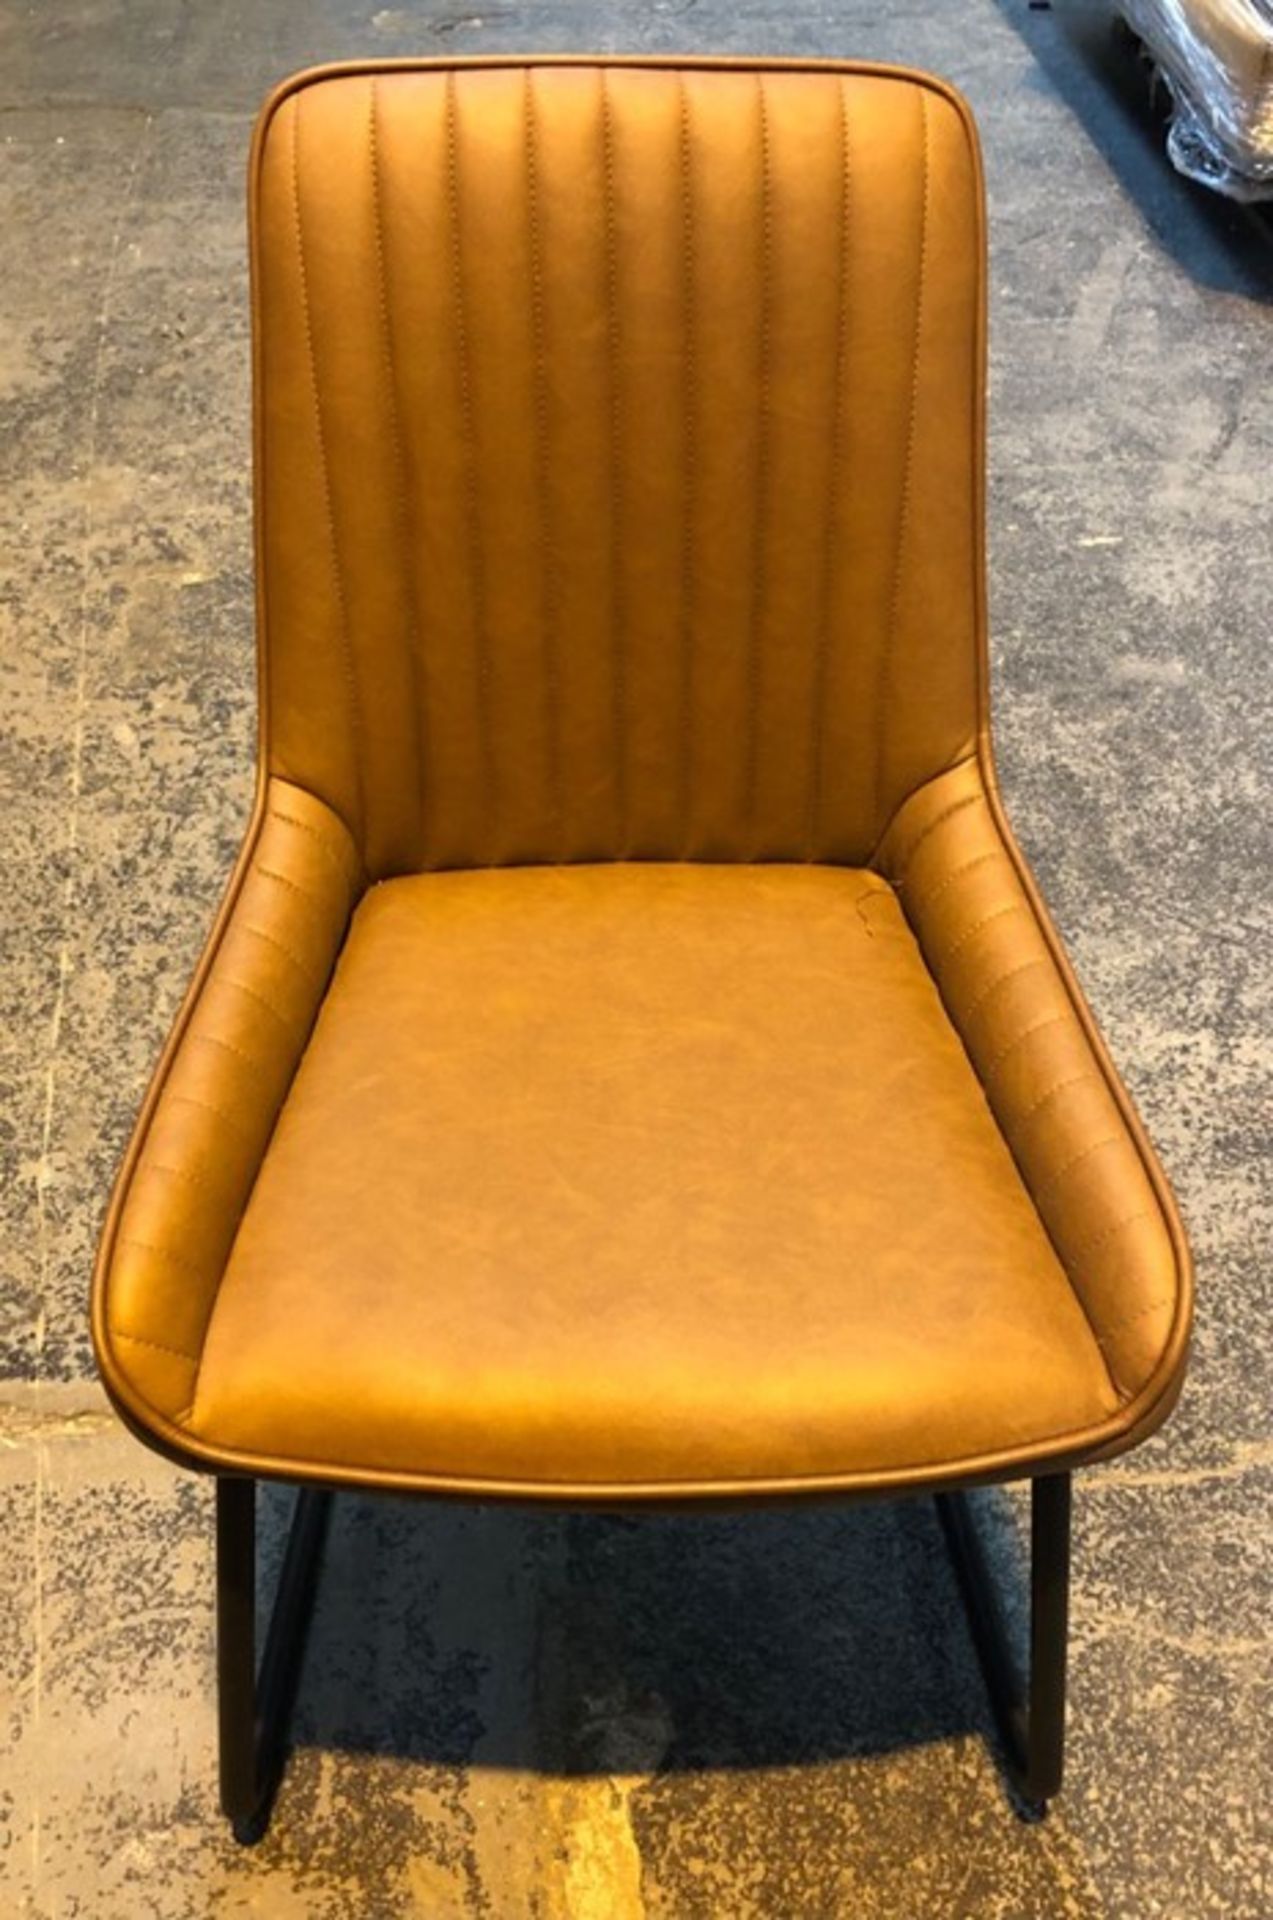 2 x JOHN LEWIS BROOKS SIDE DINING CHAIRS - Image 5 of 5